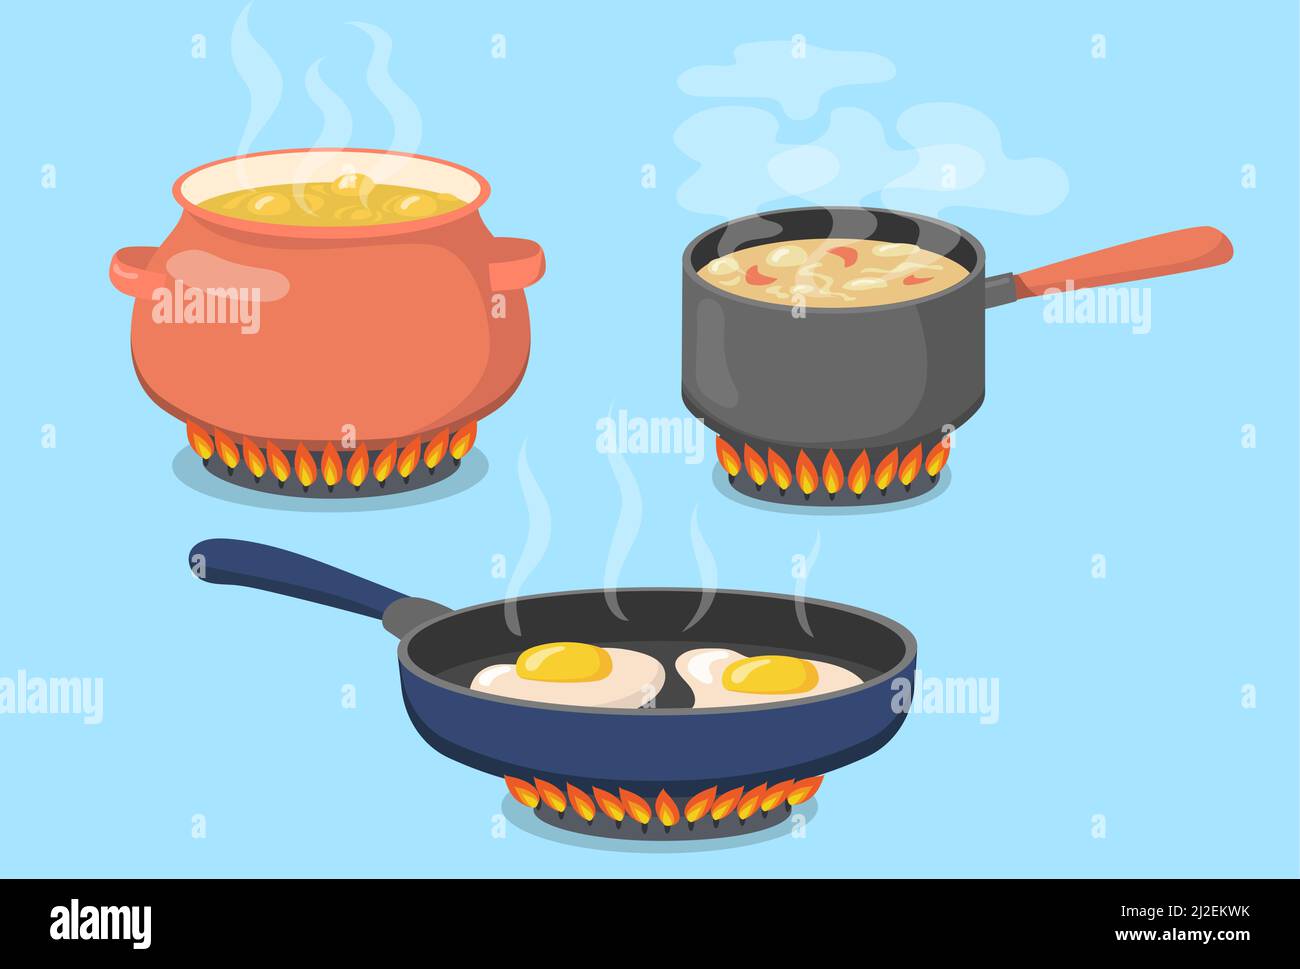 https://c8.alamy.com/comp/2J2EKWK/hot-pot-saucepan-and-pan-on-gas-stove-flat-set-for-web-design-cartoon-food-prepared-on-kitchen-isolated-vector-illustration-collection-cooking-and-2J2EKWK.jpg